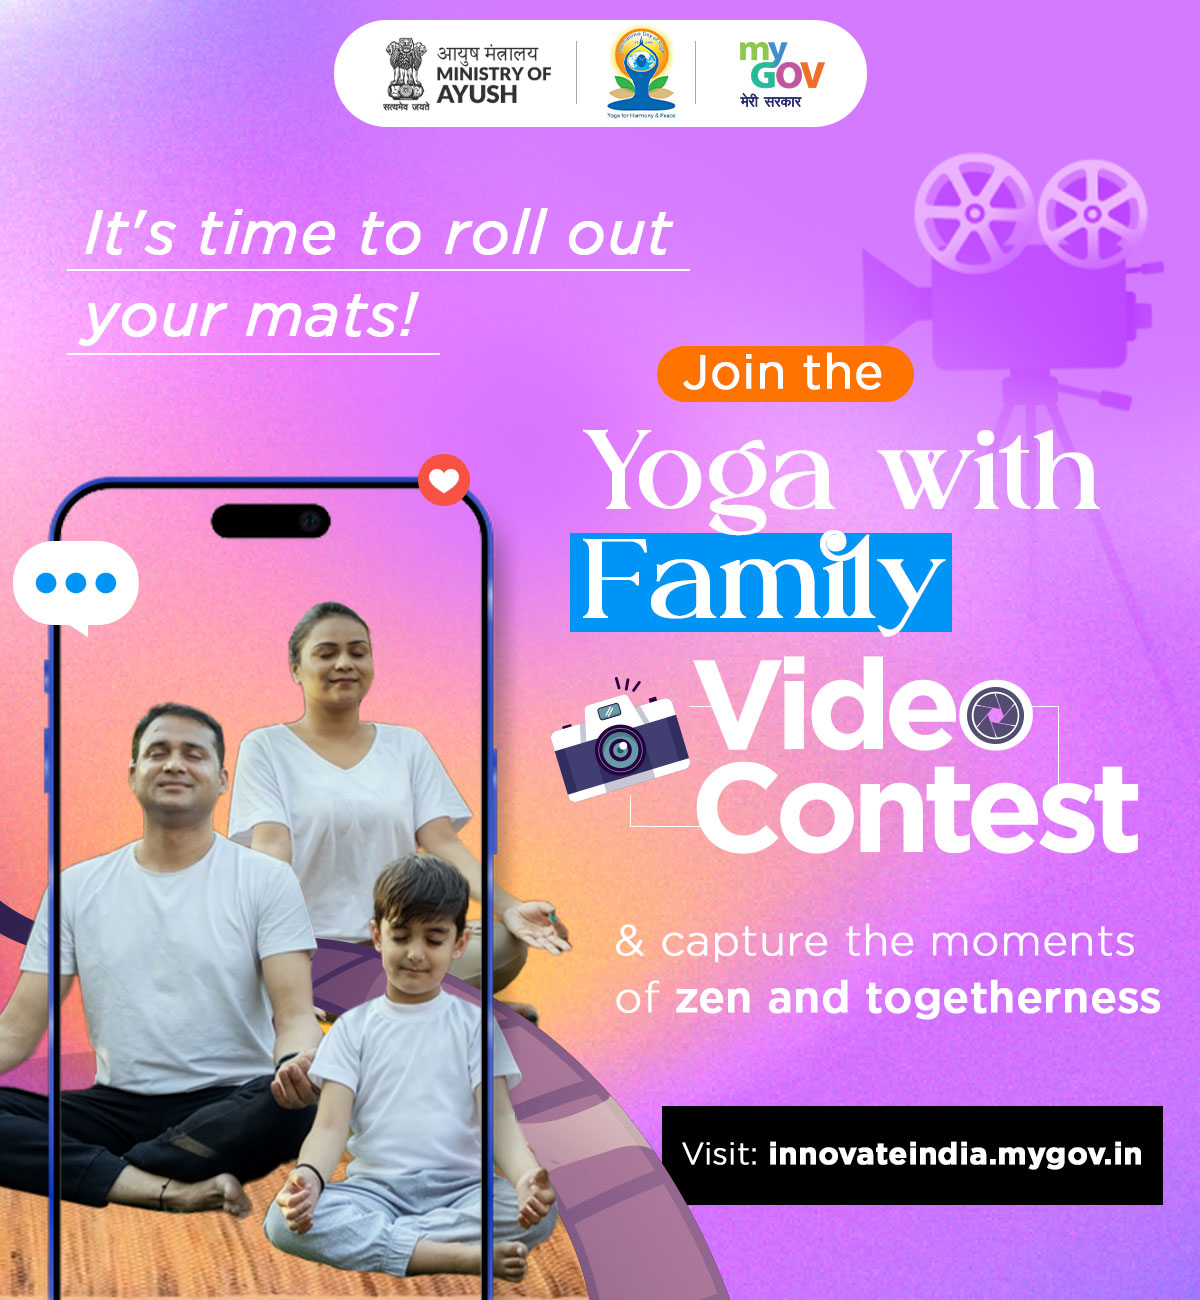  Yoga with Family Video Contest.